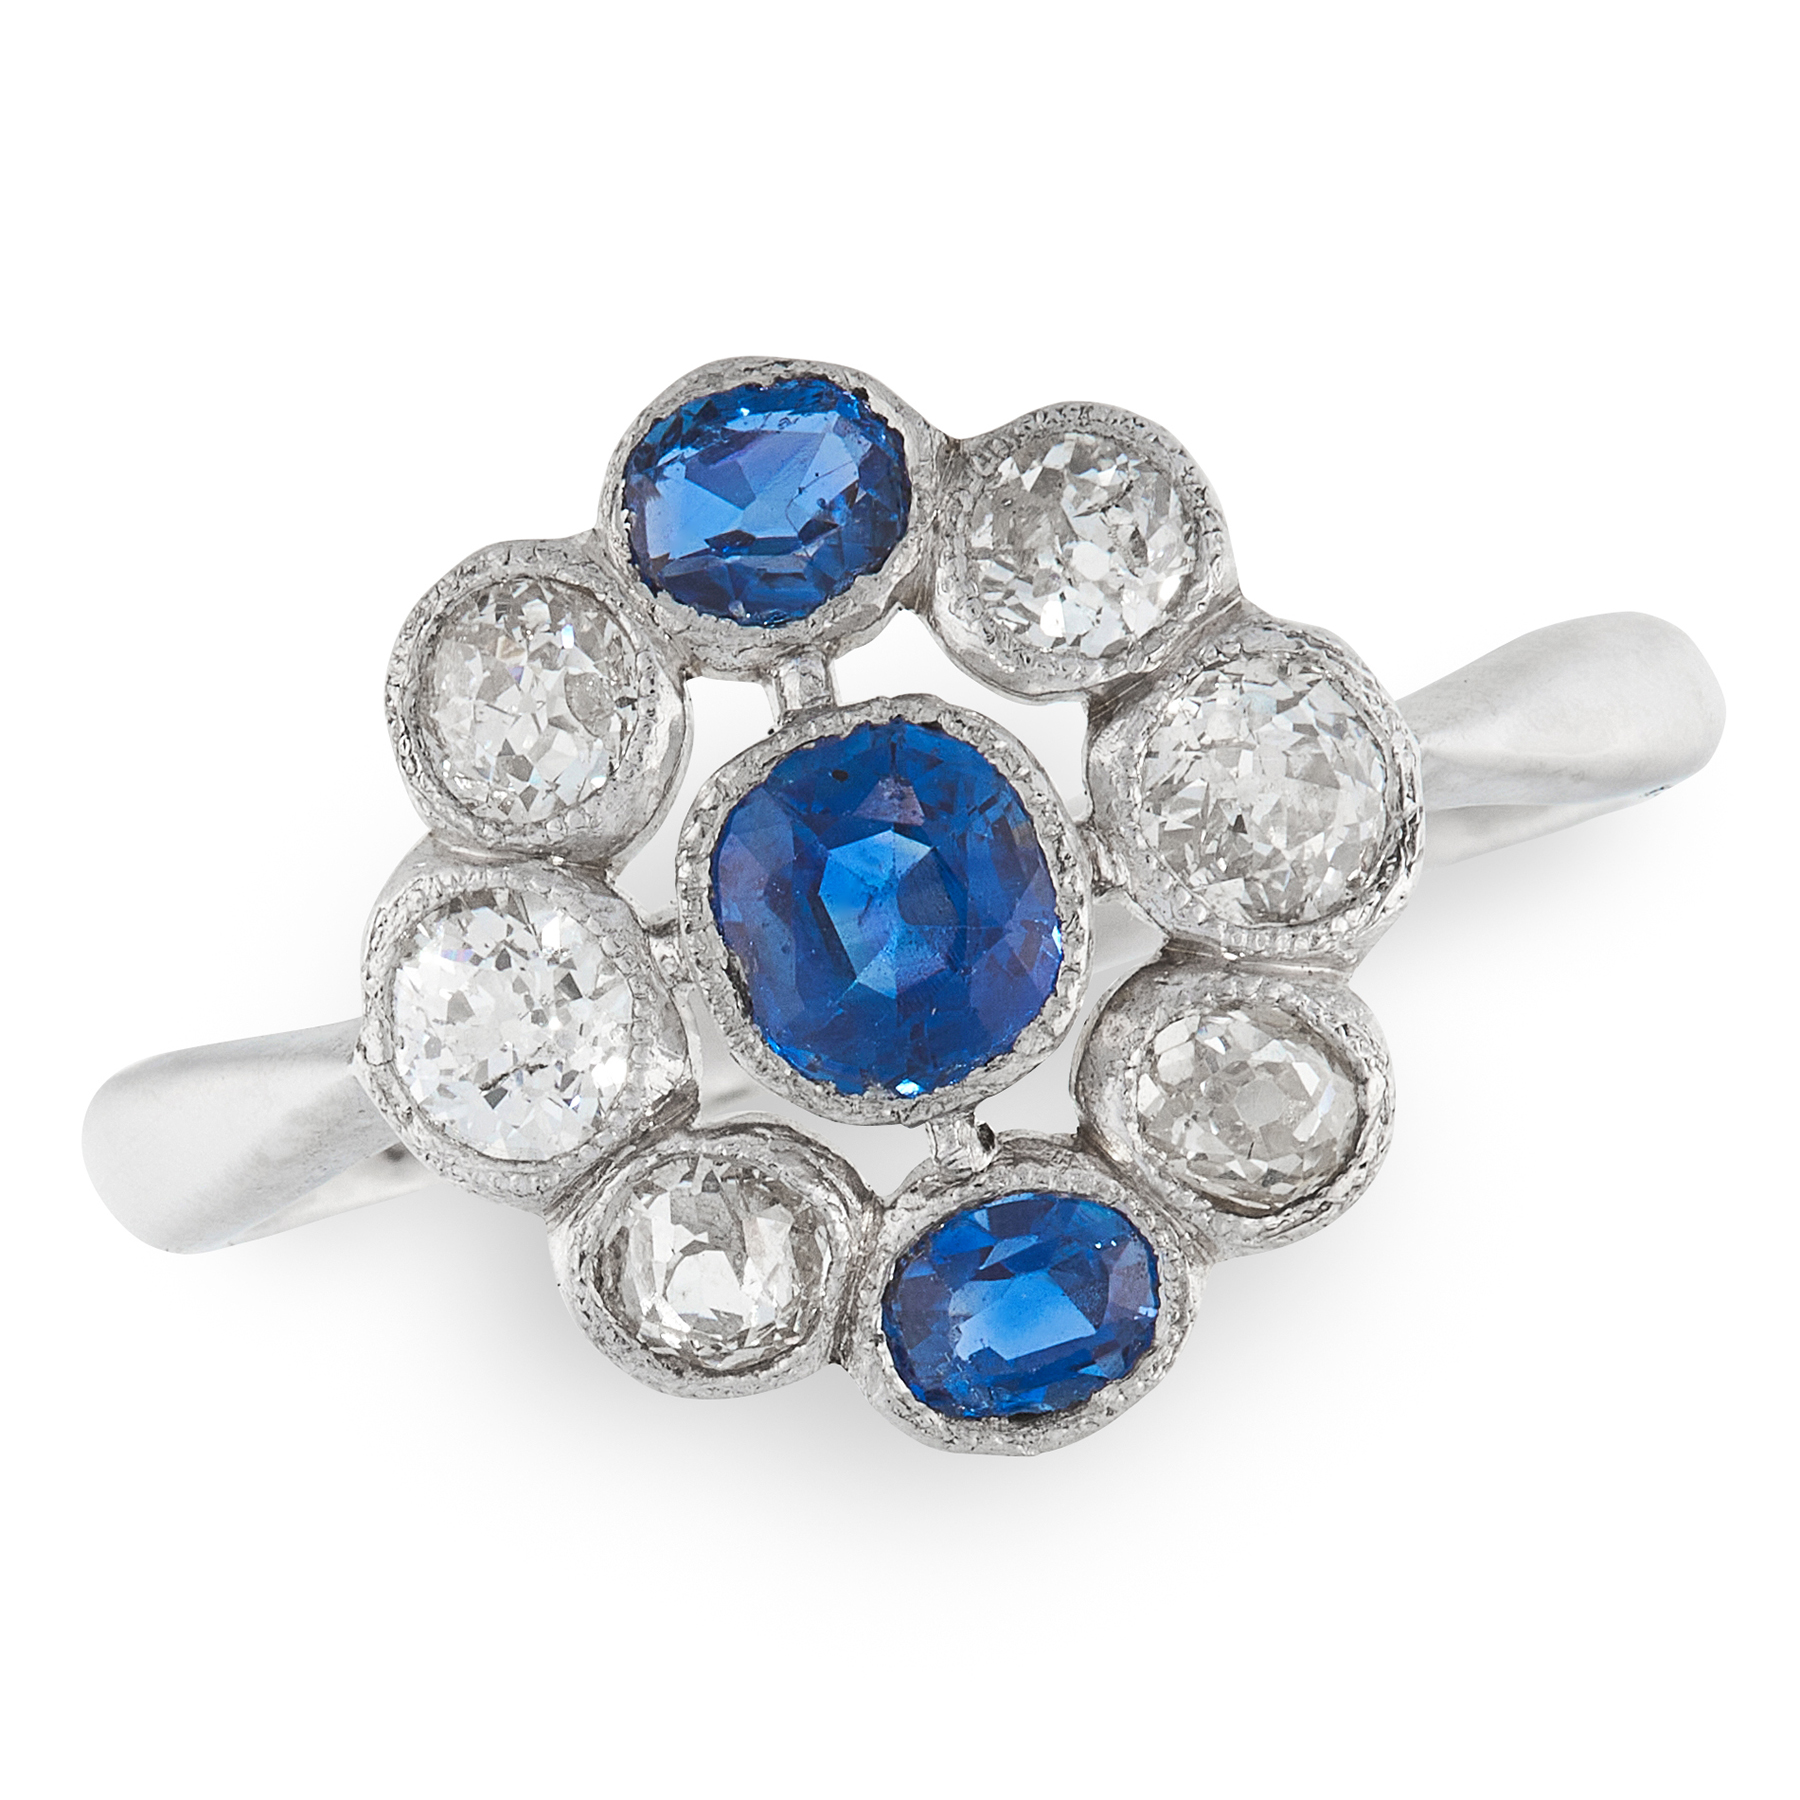 A SAPPHIRE AND DIAMOND DRESS RING in 18ct white gold, set with a trio of graduated cushion cut